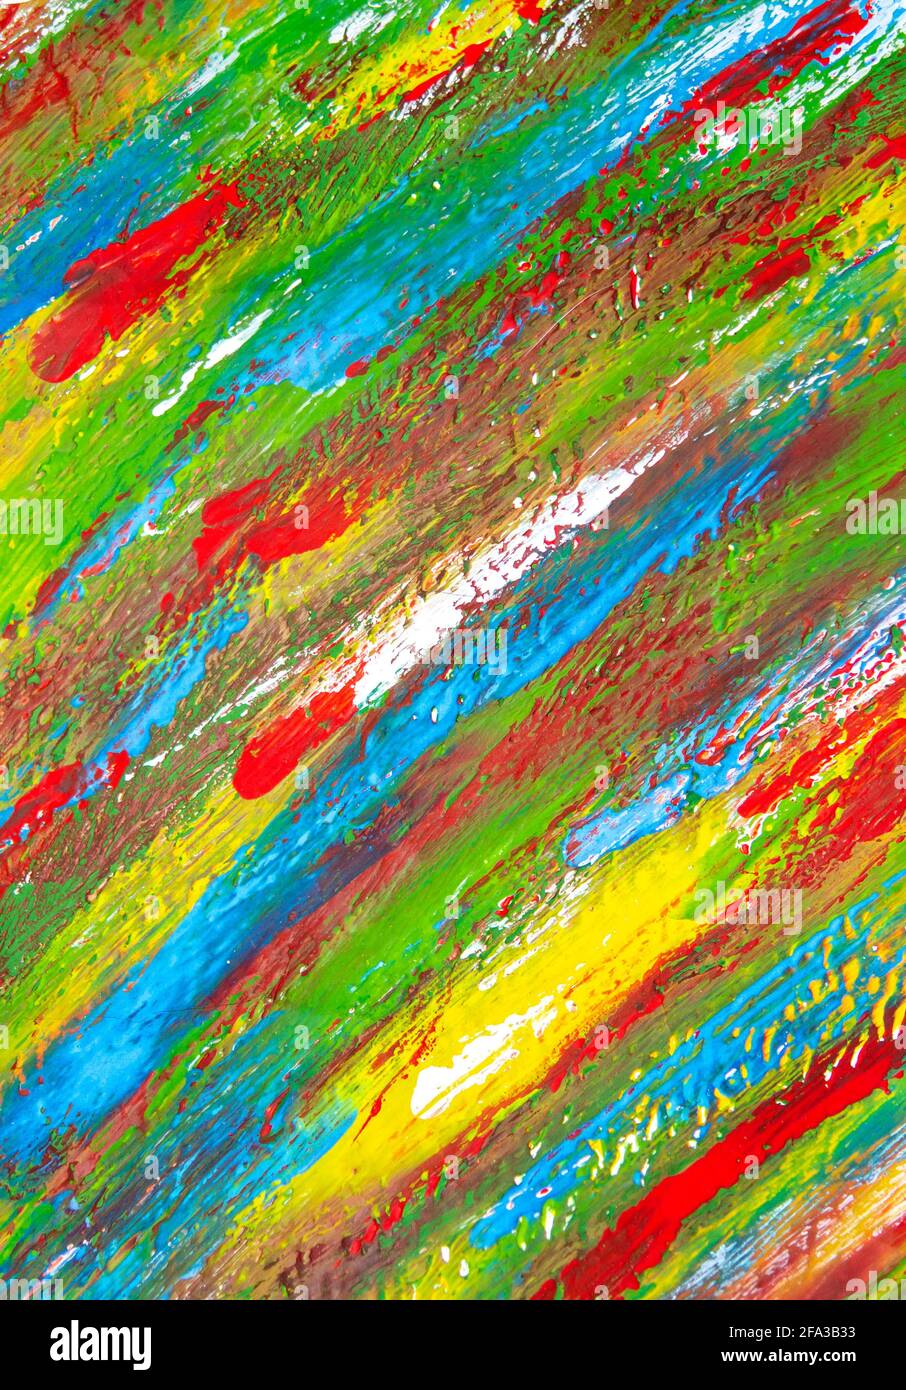 Multicolored brush strokes on white paper. Abstract creative background. Stock Photo